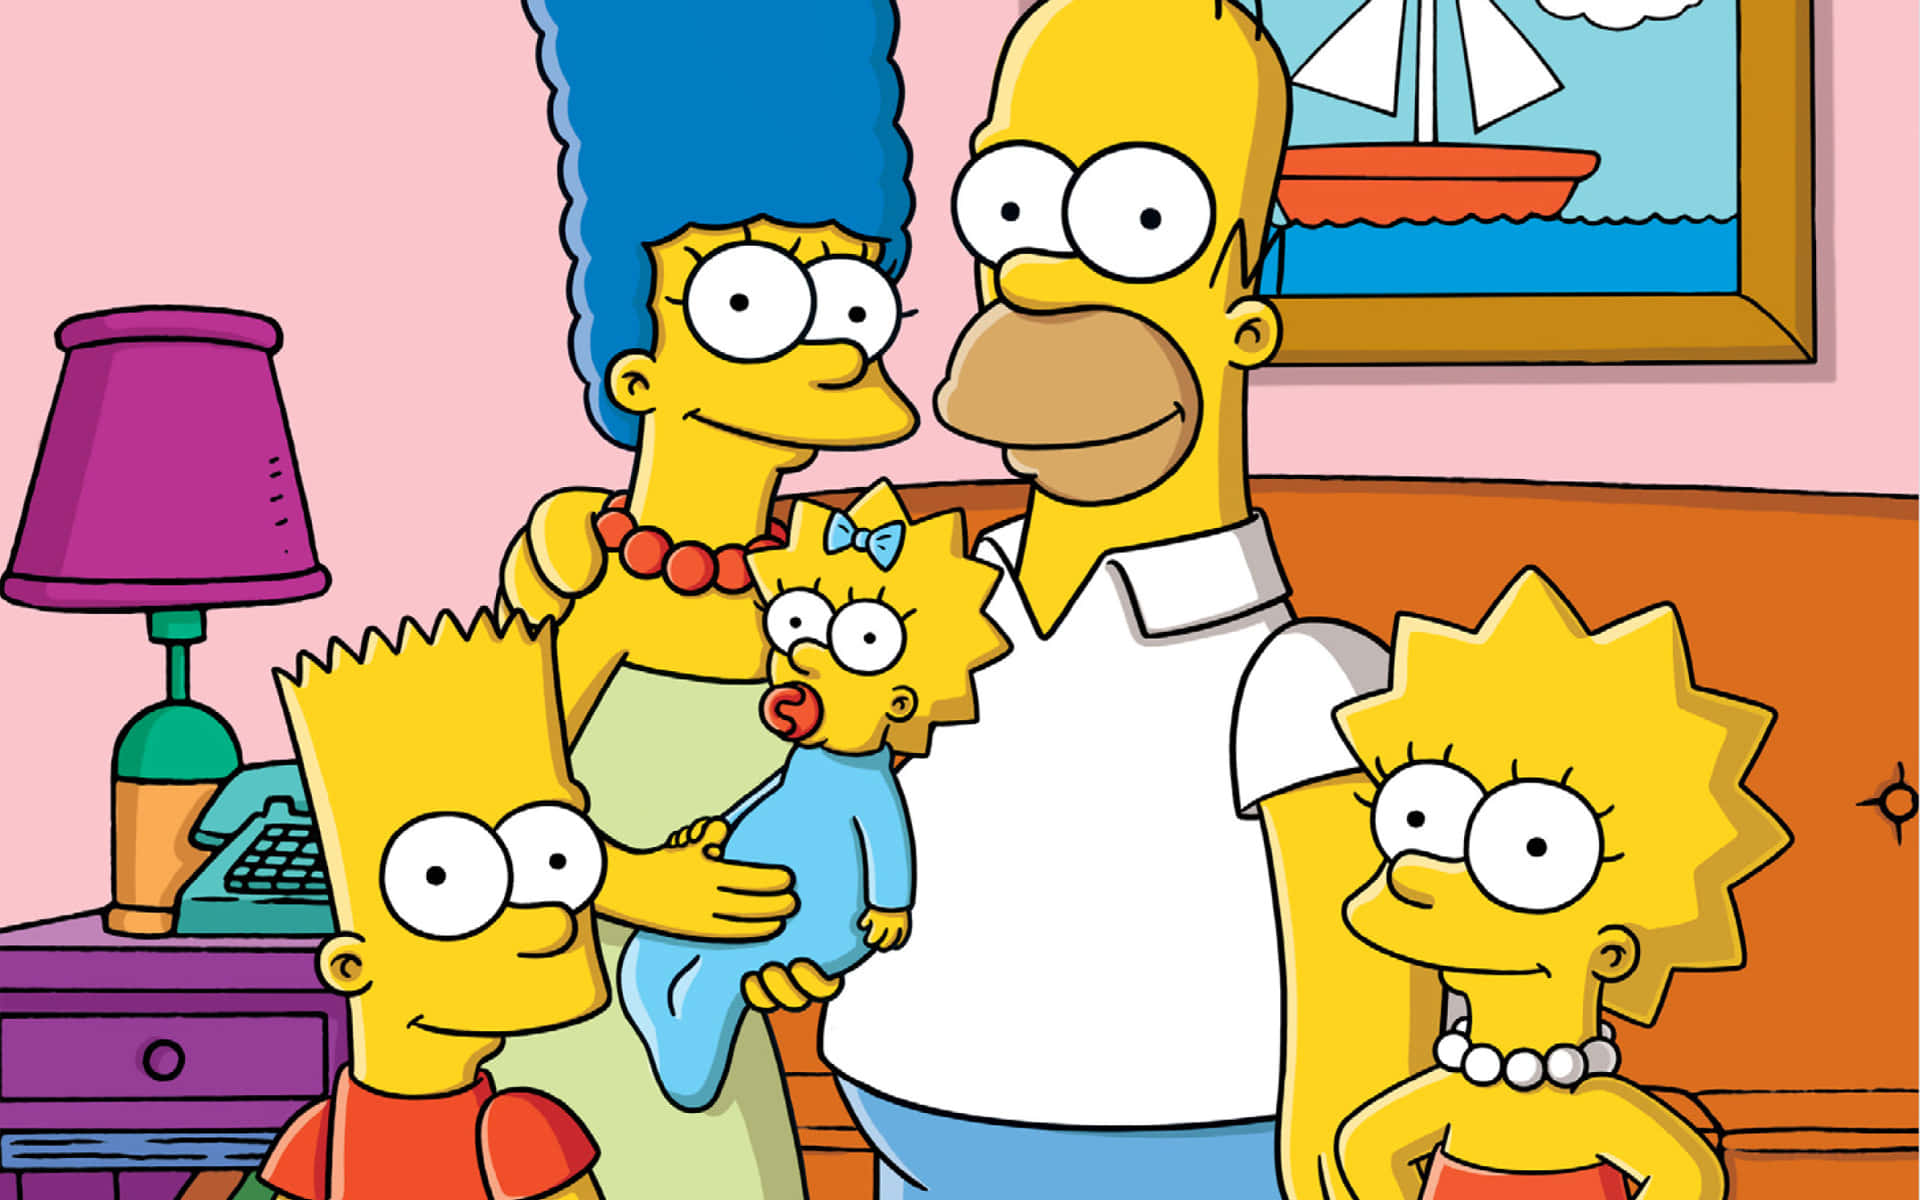 The Simpson family living a life of genuine quality.